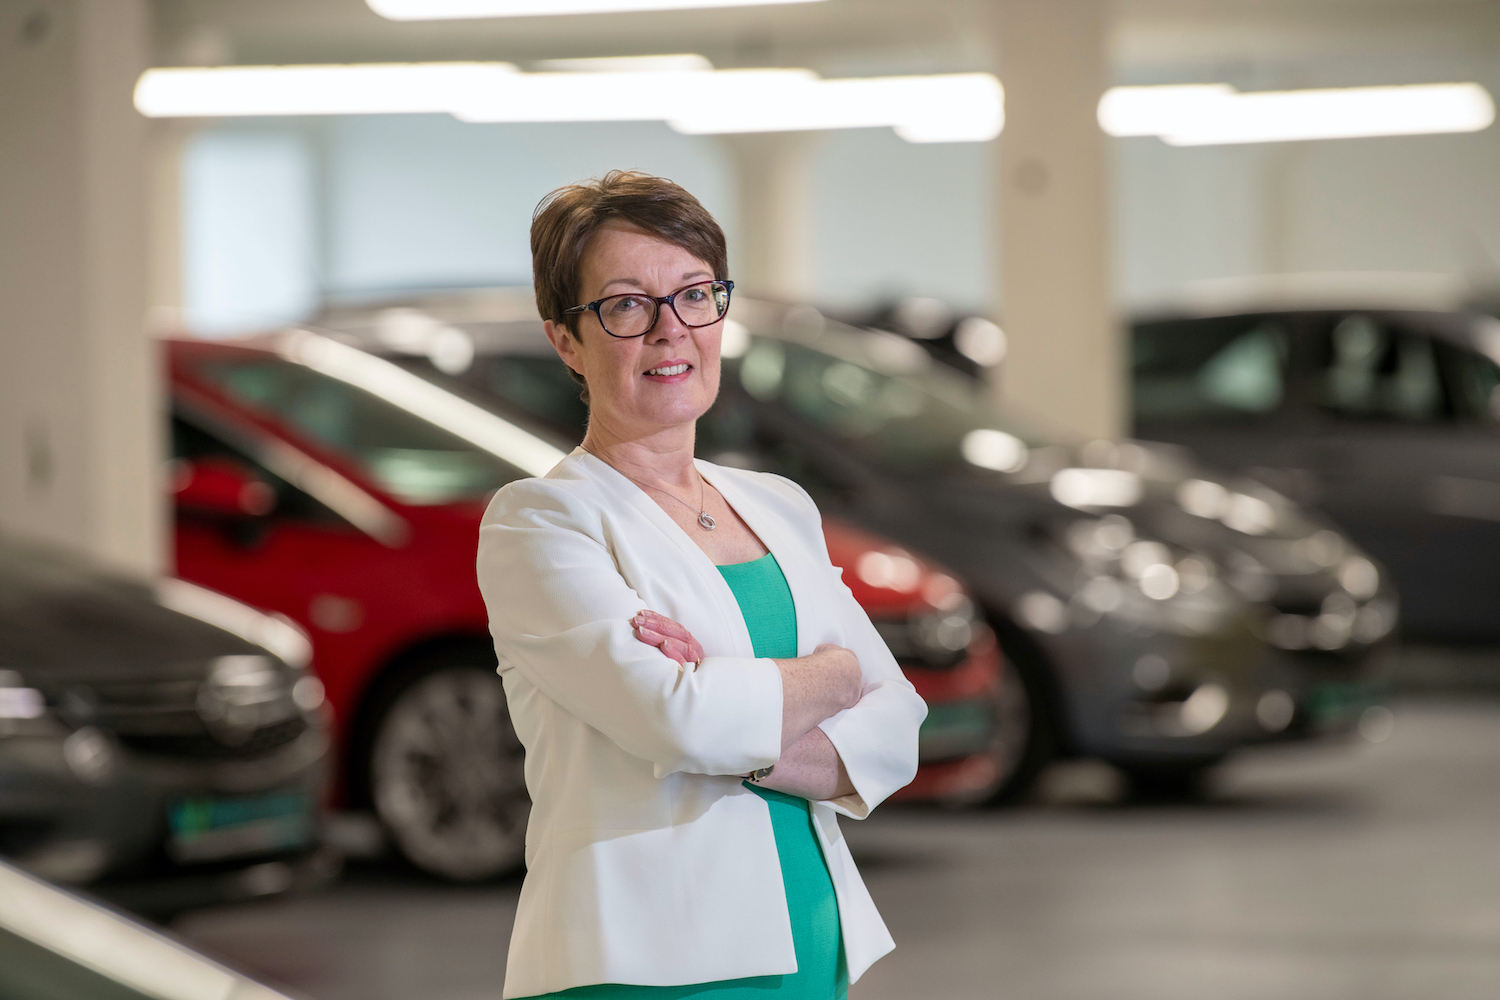 Car Industry News | Windsor Group opens MotorMall in Galway | CompleteCar.ie